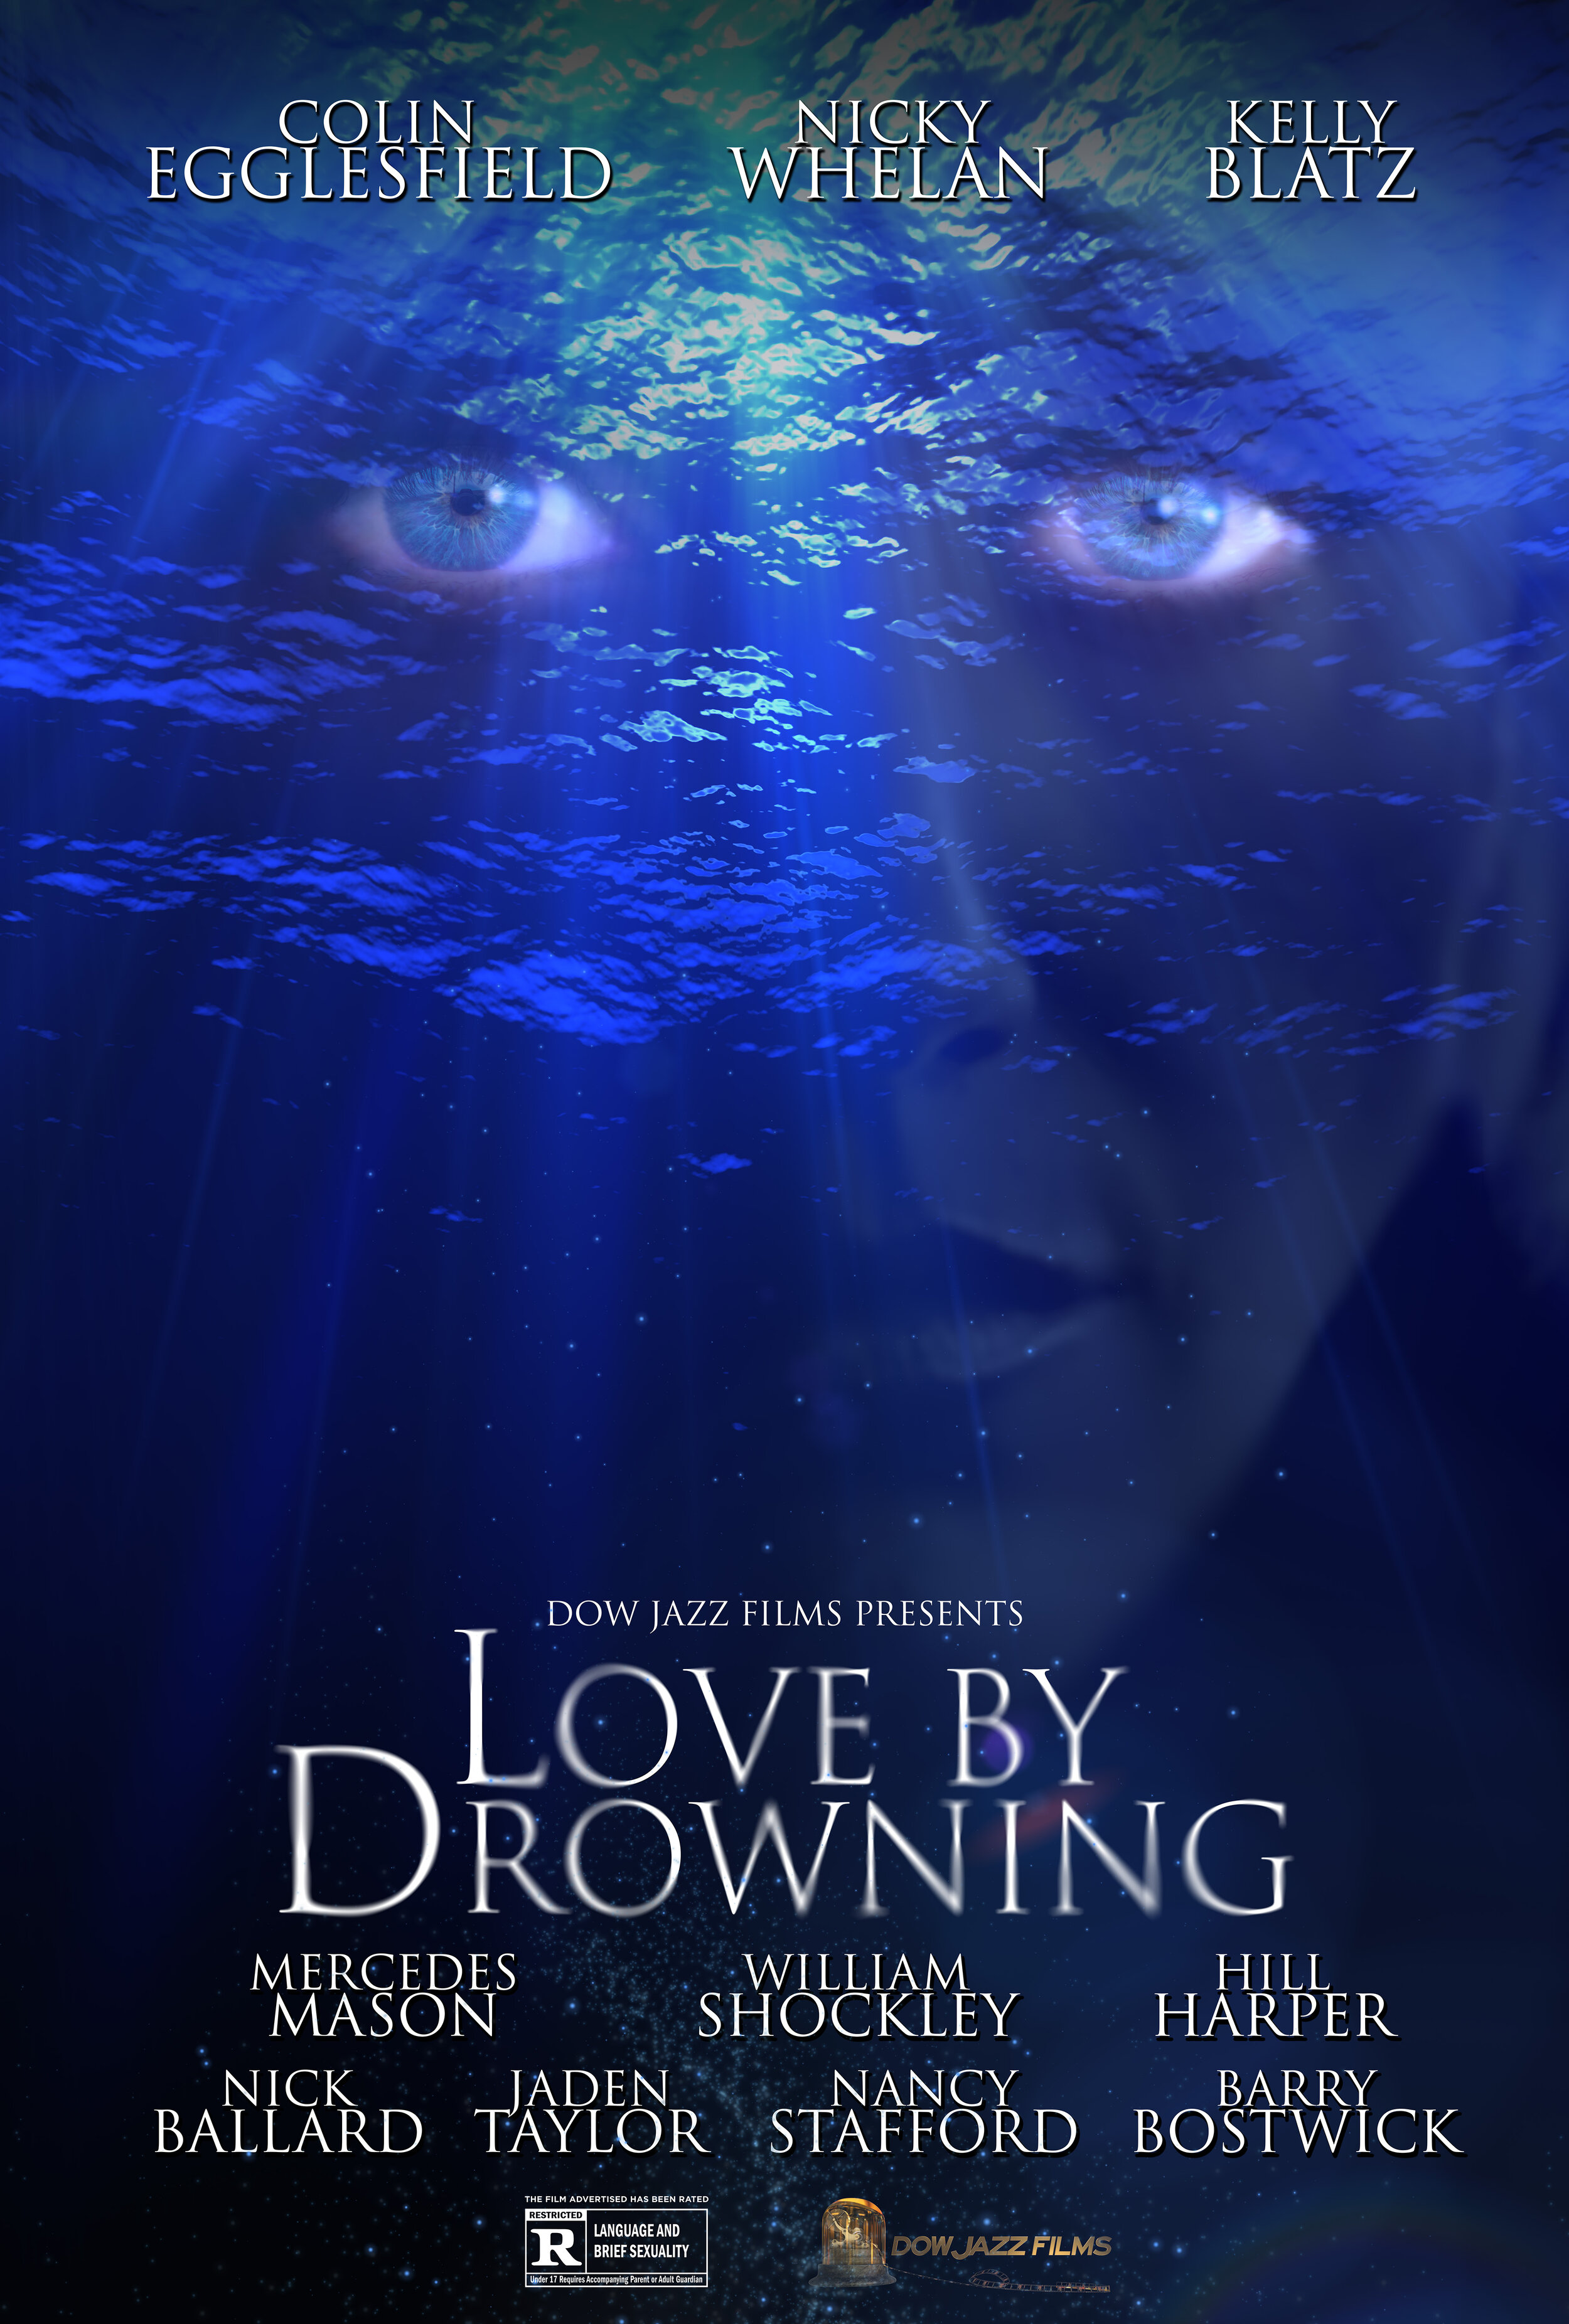 LOVE BY DROWNING